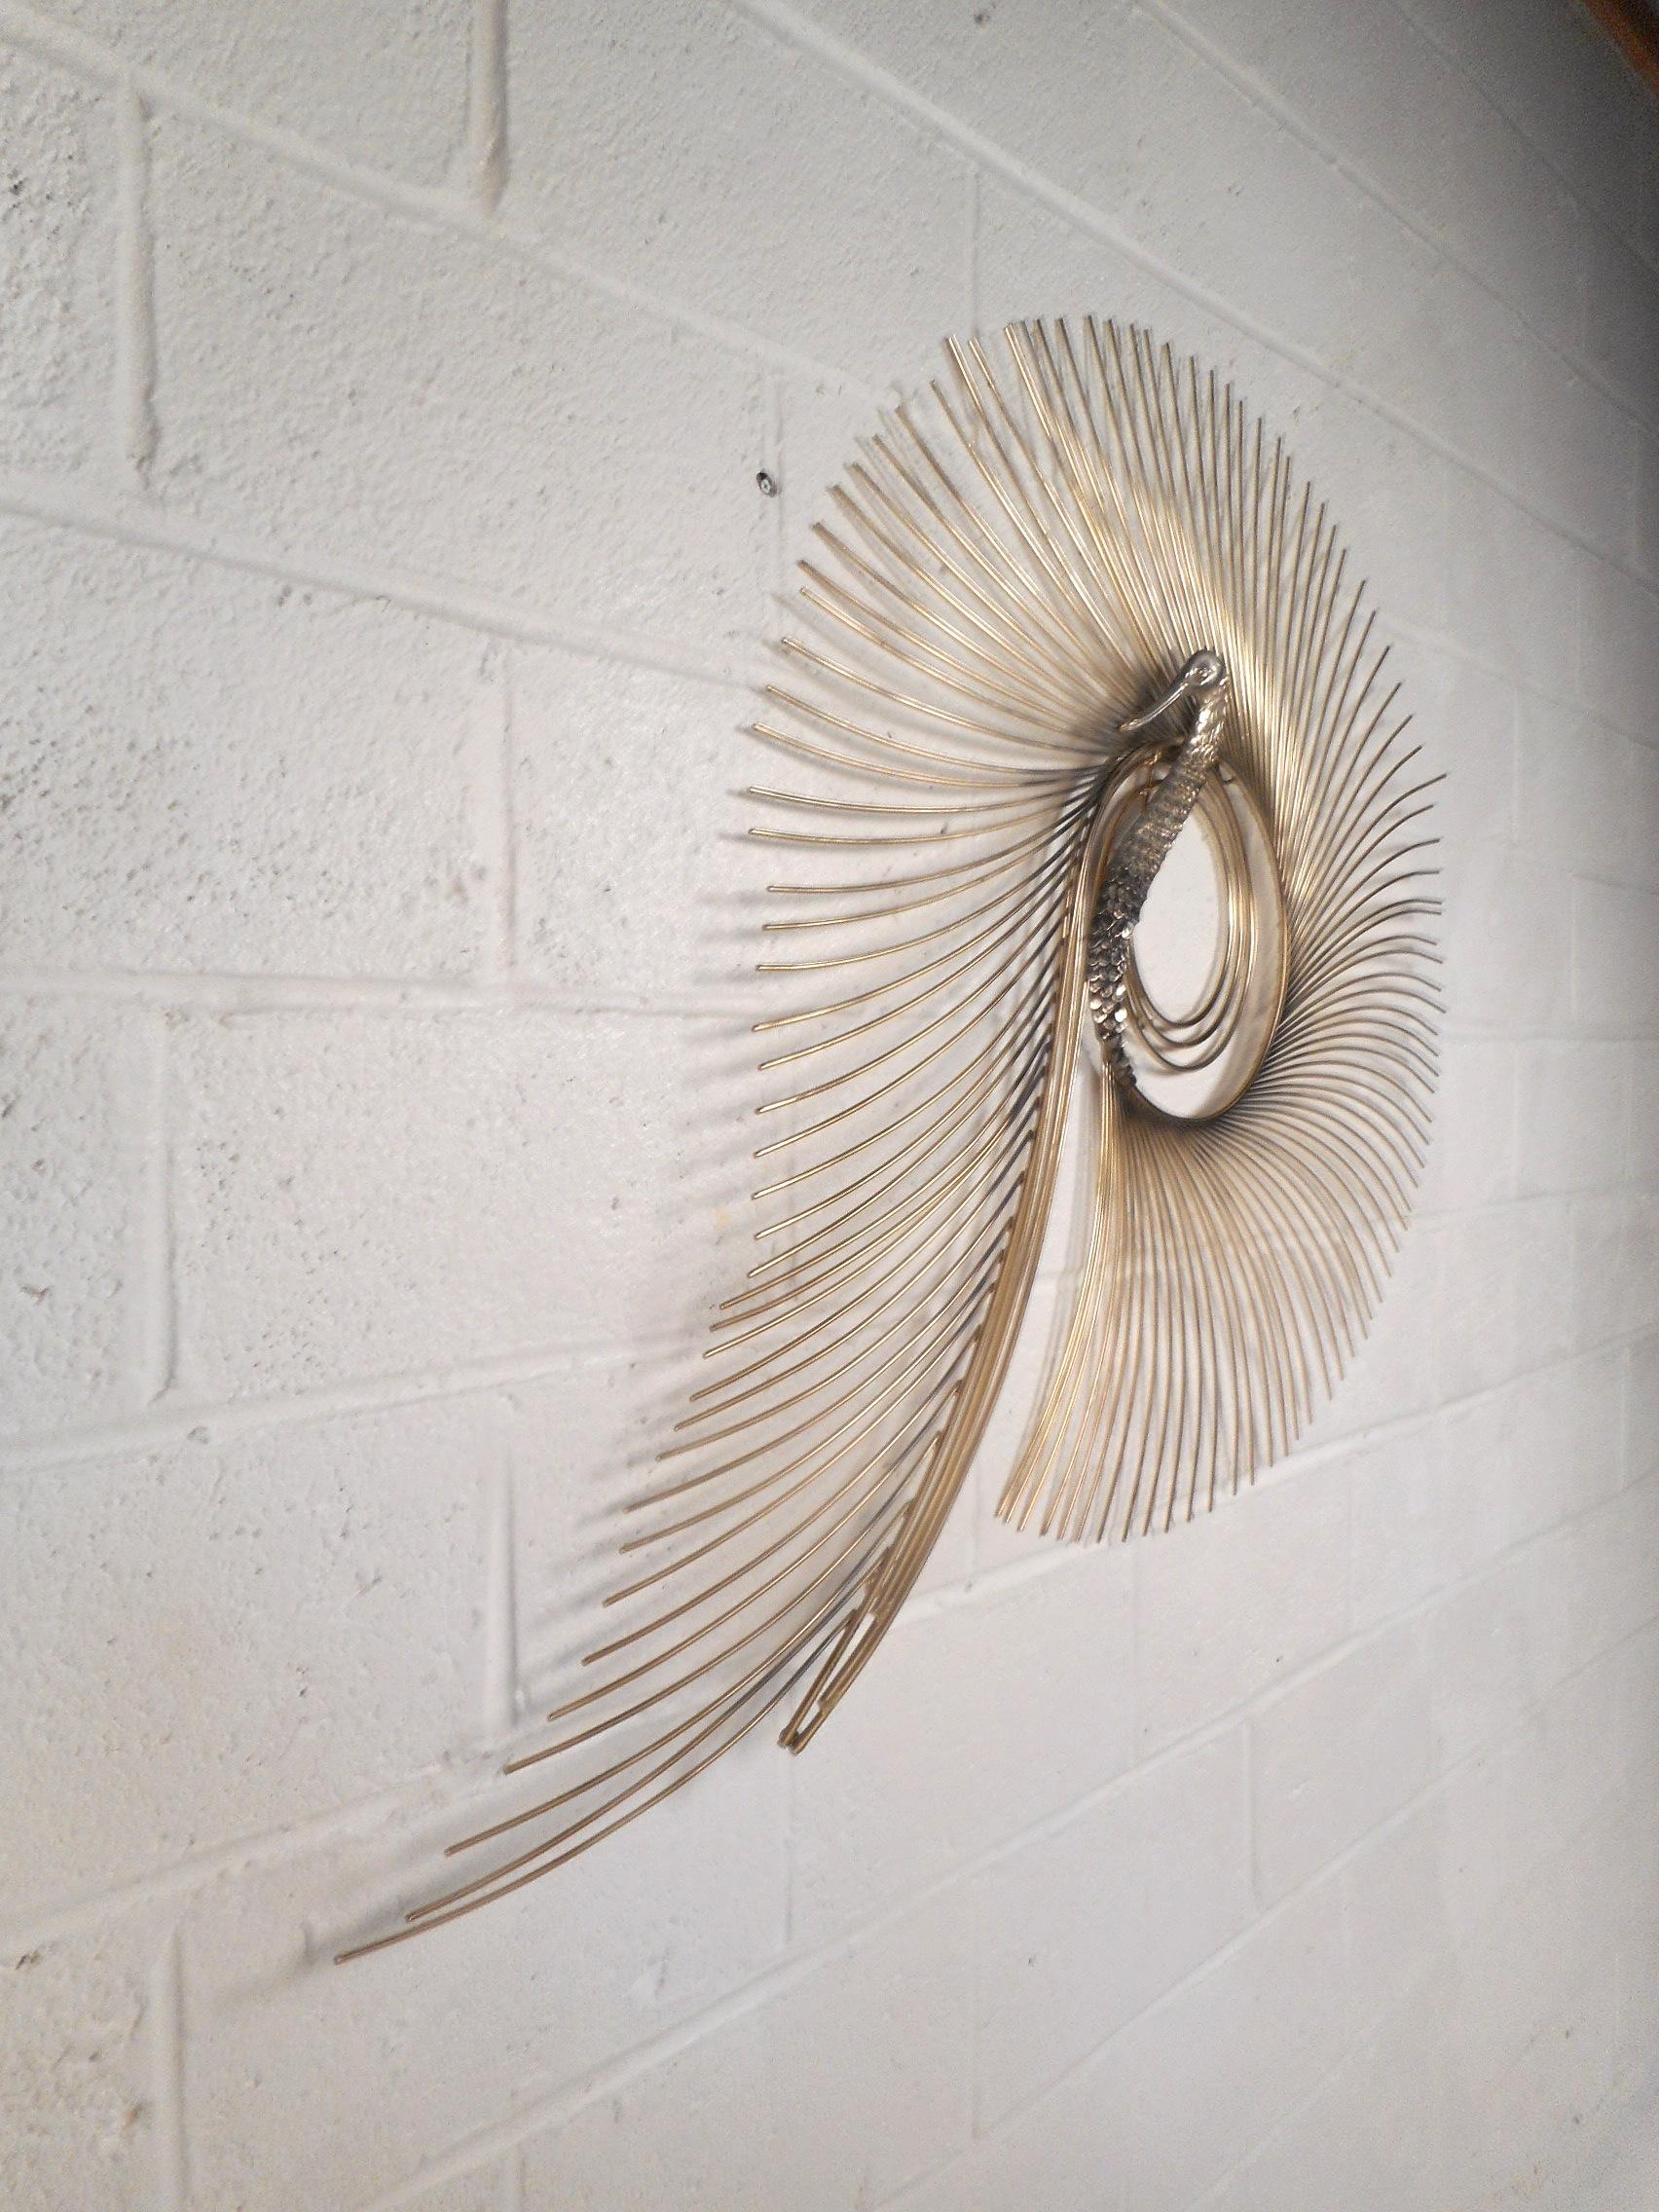 This stunning vintage modern three dimensional wall art features a polished brass body with thick rods creating a spiraling design around it. A wonderful peacock sculpture with intricate detail signed by C. Jere and dated 1987. This unusual and